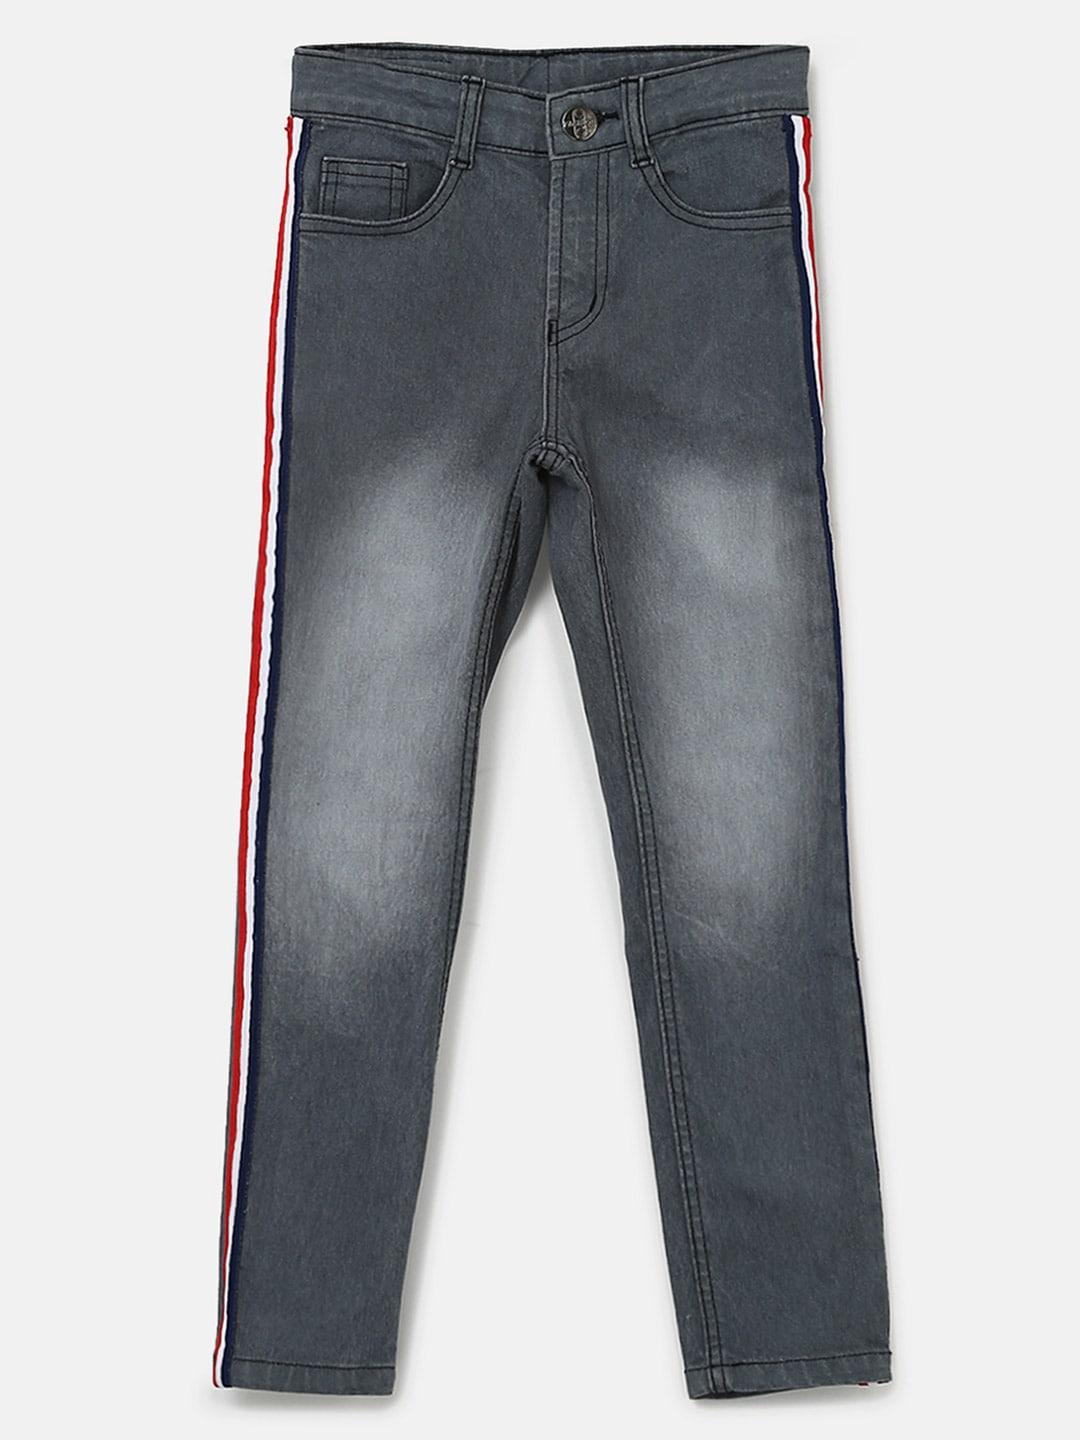 urbano-juniors-boys-grey-slim-fit-mid-rise-clean-look-stretchable-jeans-with-side-stripes